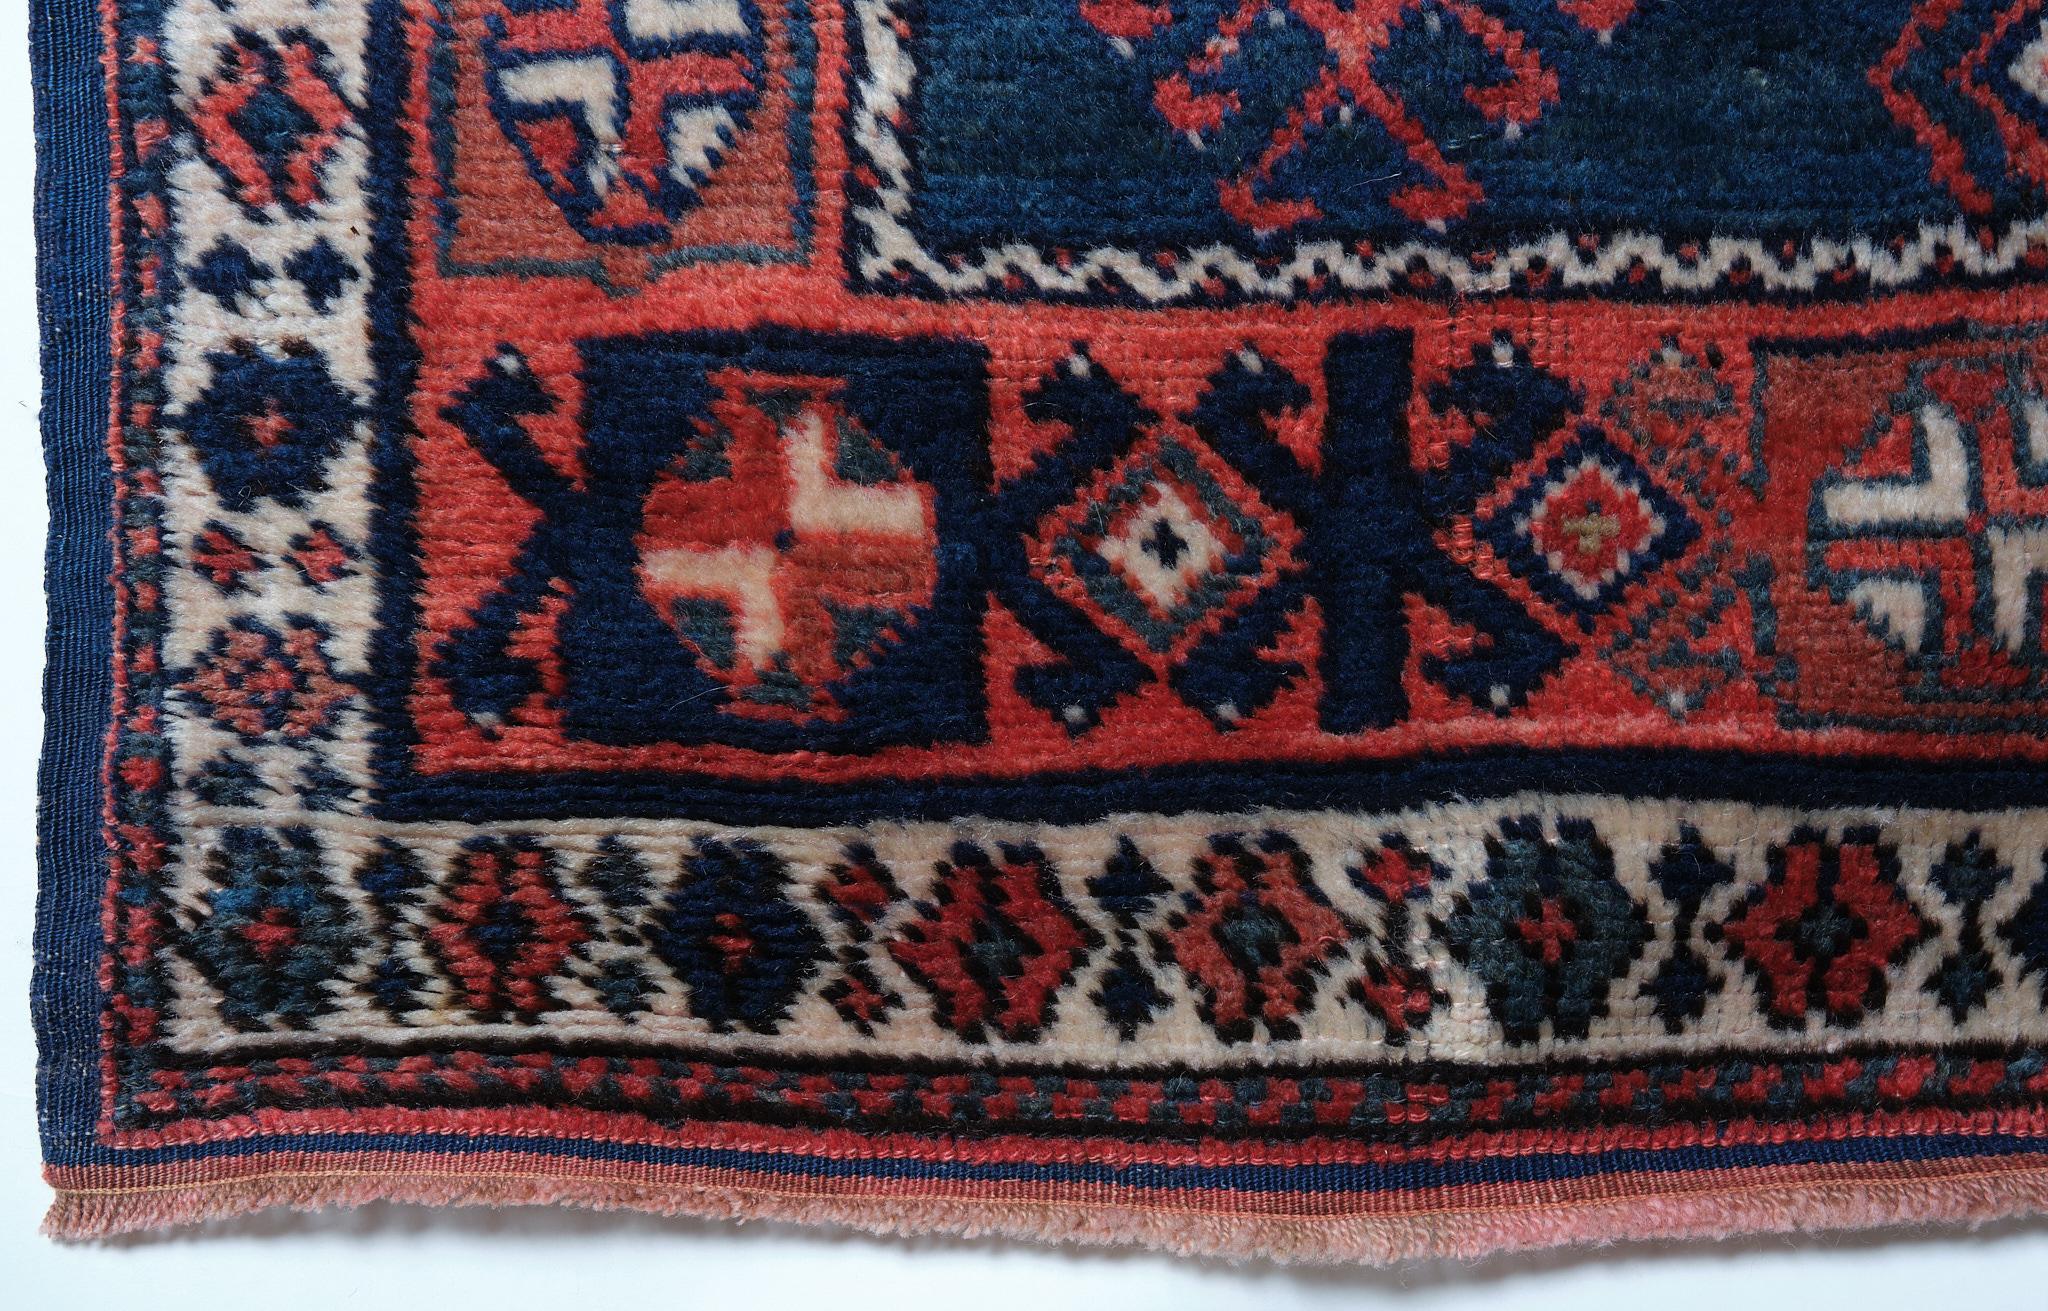 This is an Antique Kurdish Rug from the Eastern Anatolia region with a rare and beautiful color composition.

Anatolian Kurdish rugs are handwoven rugs that originate from the Anatolian regions of Turkey and are associated with the Kurdish weaving